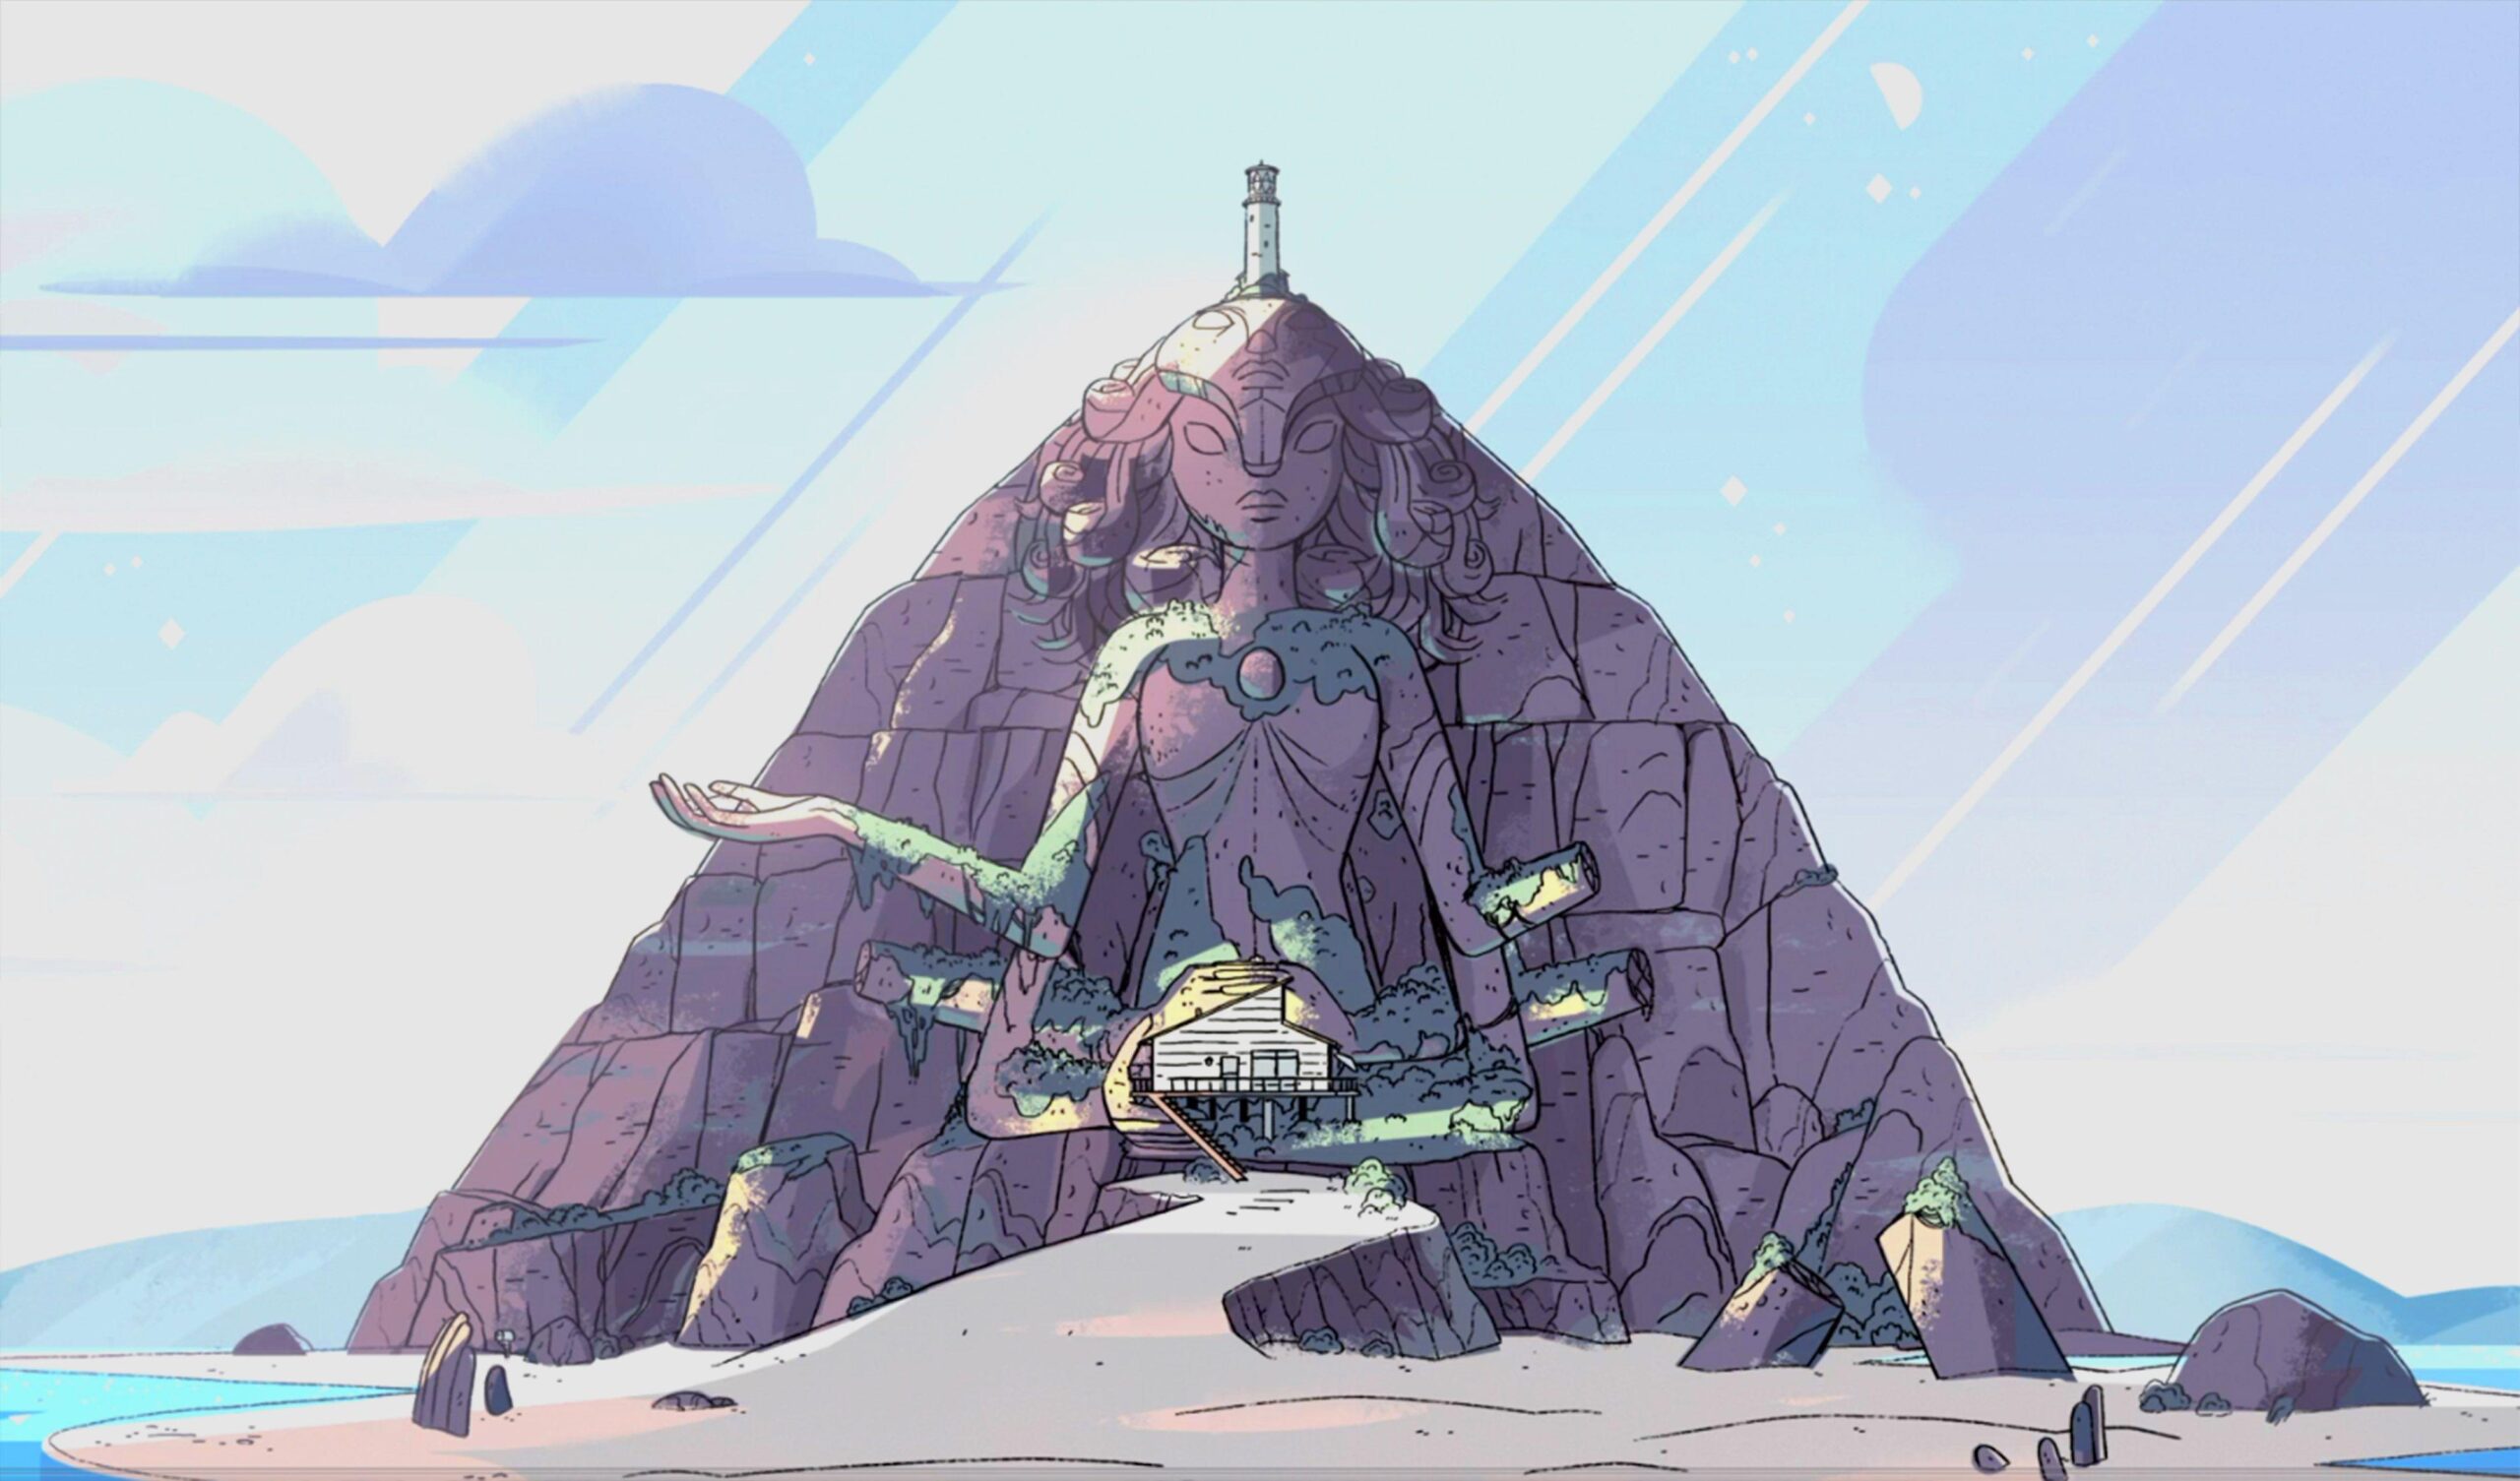 Backgrounds for any steven universe fans out there hopefully